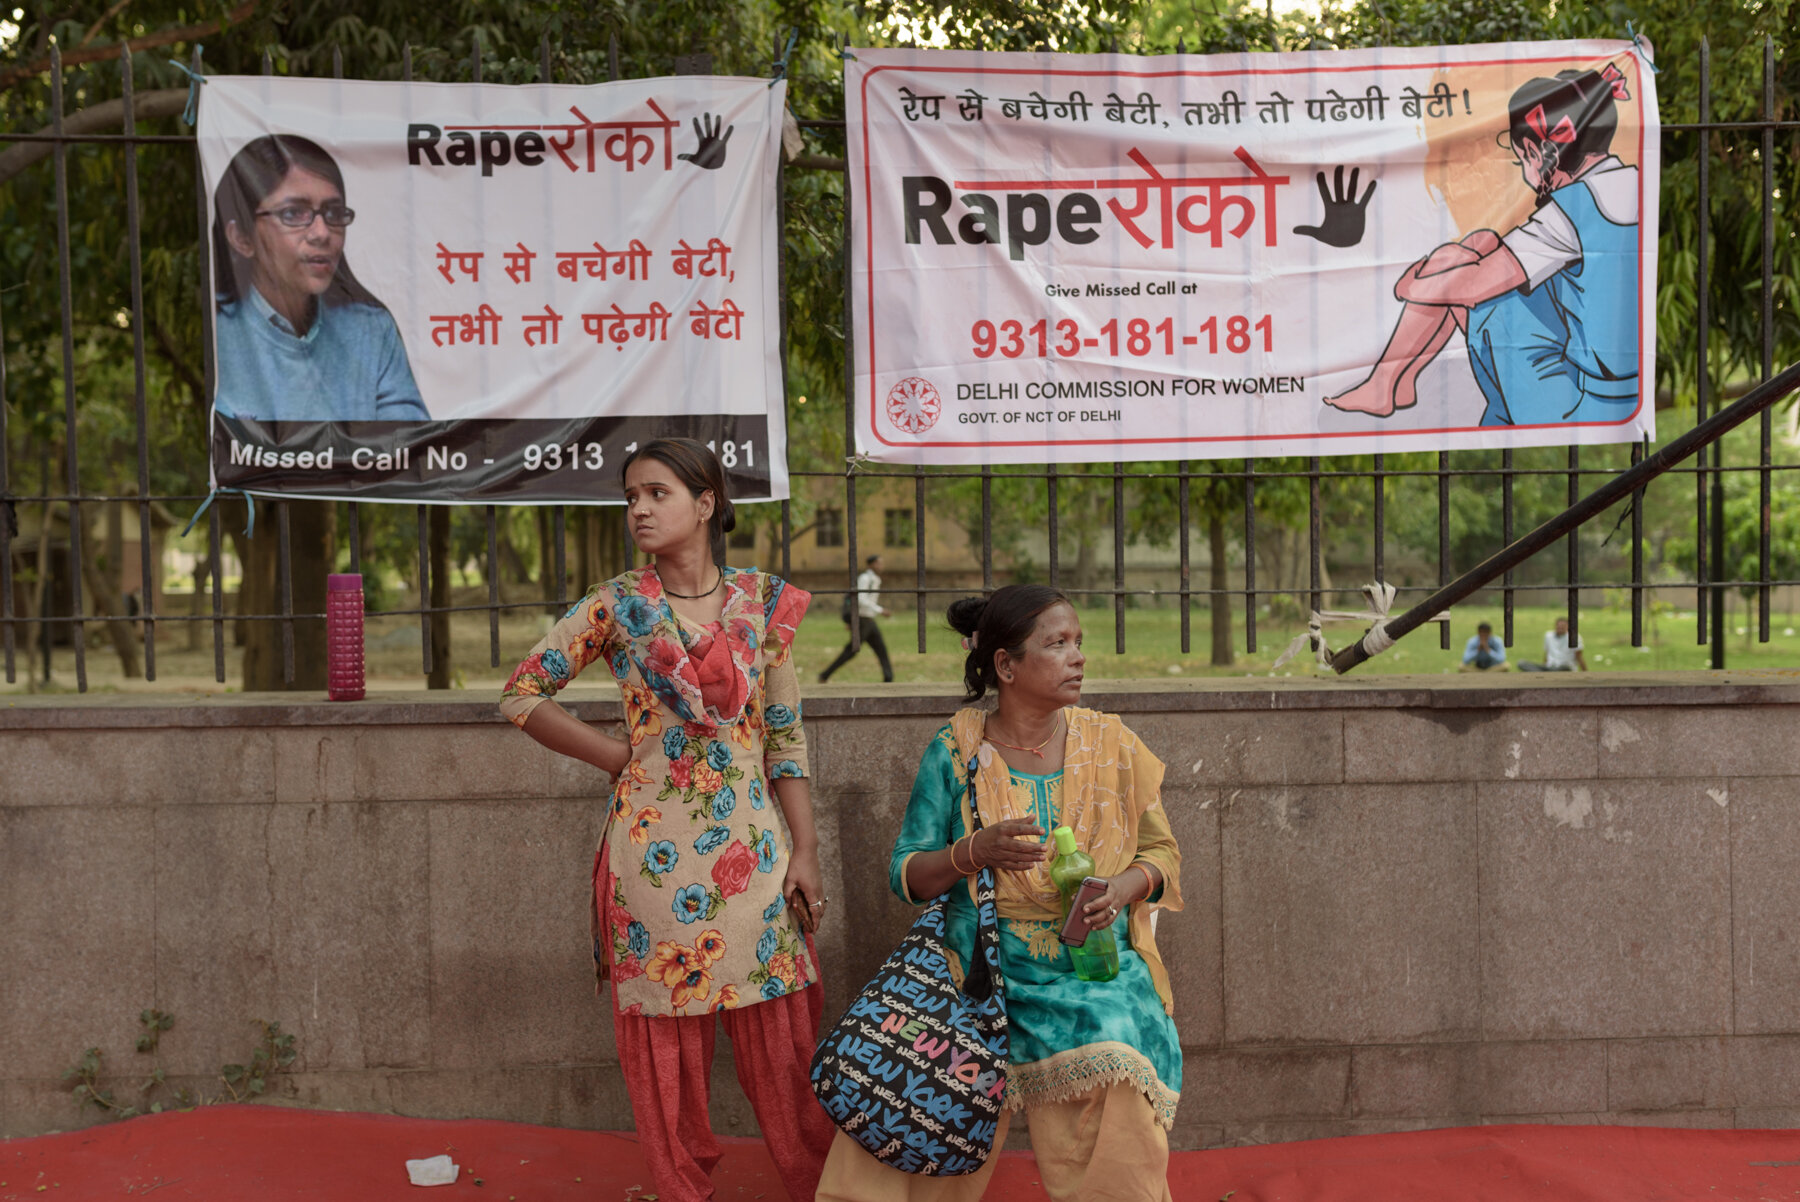  Posters by Delhi Commission for Women  (DCW) addressing the issue of sexual violence near Samta Sthal, Delhi during the fasting of DCW's Chairperson Swati Maliwal. 